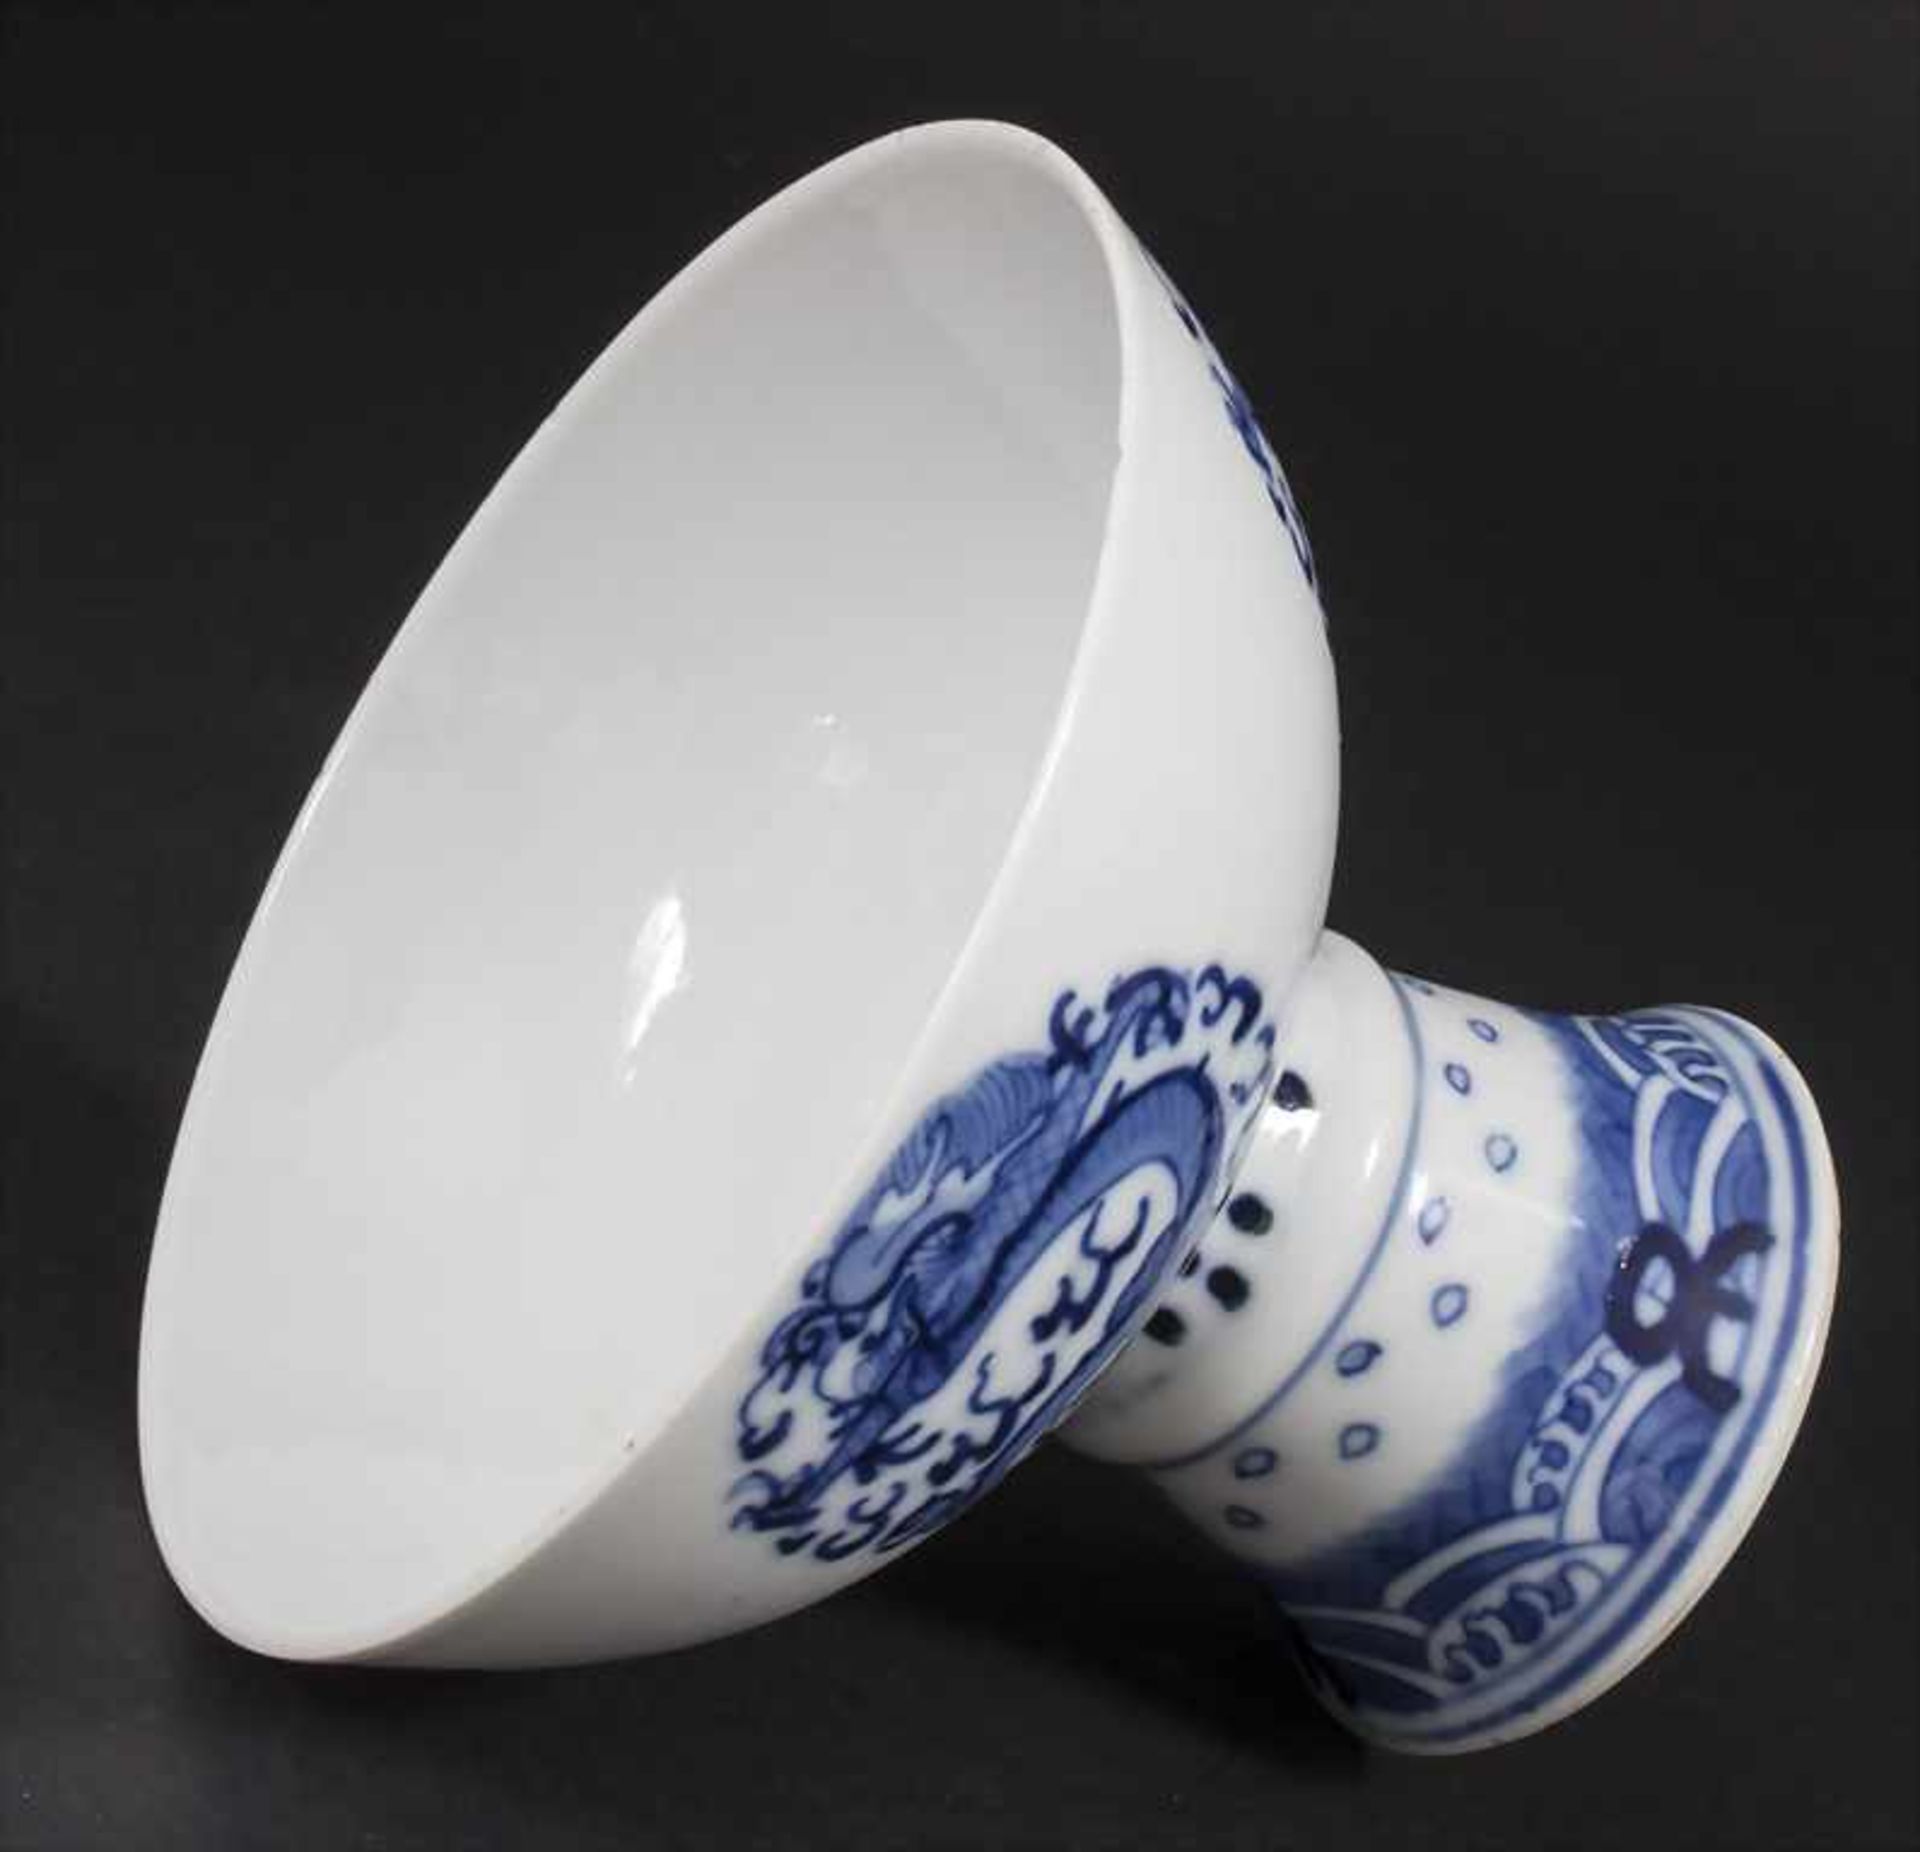 Porzellan-Fußschale / A porcelain footed bowl, China, Qing-Dynastie (1644-1911) - Image 3 of 4